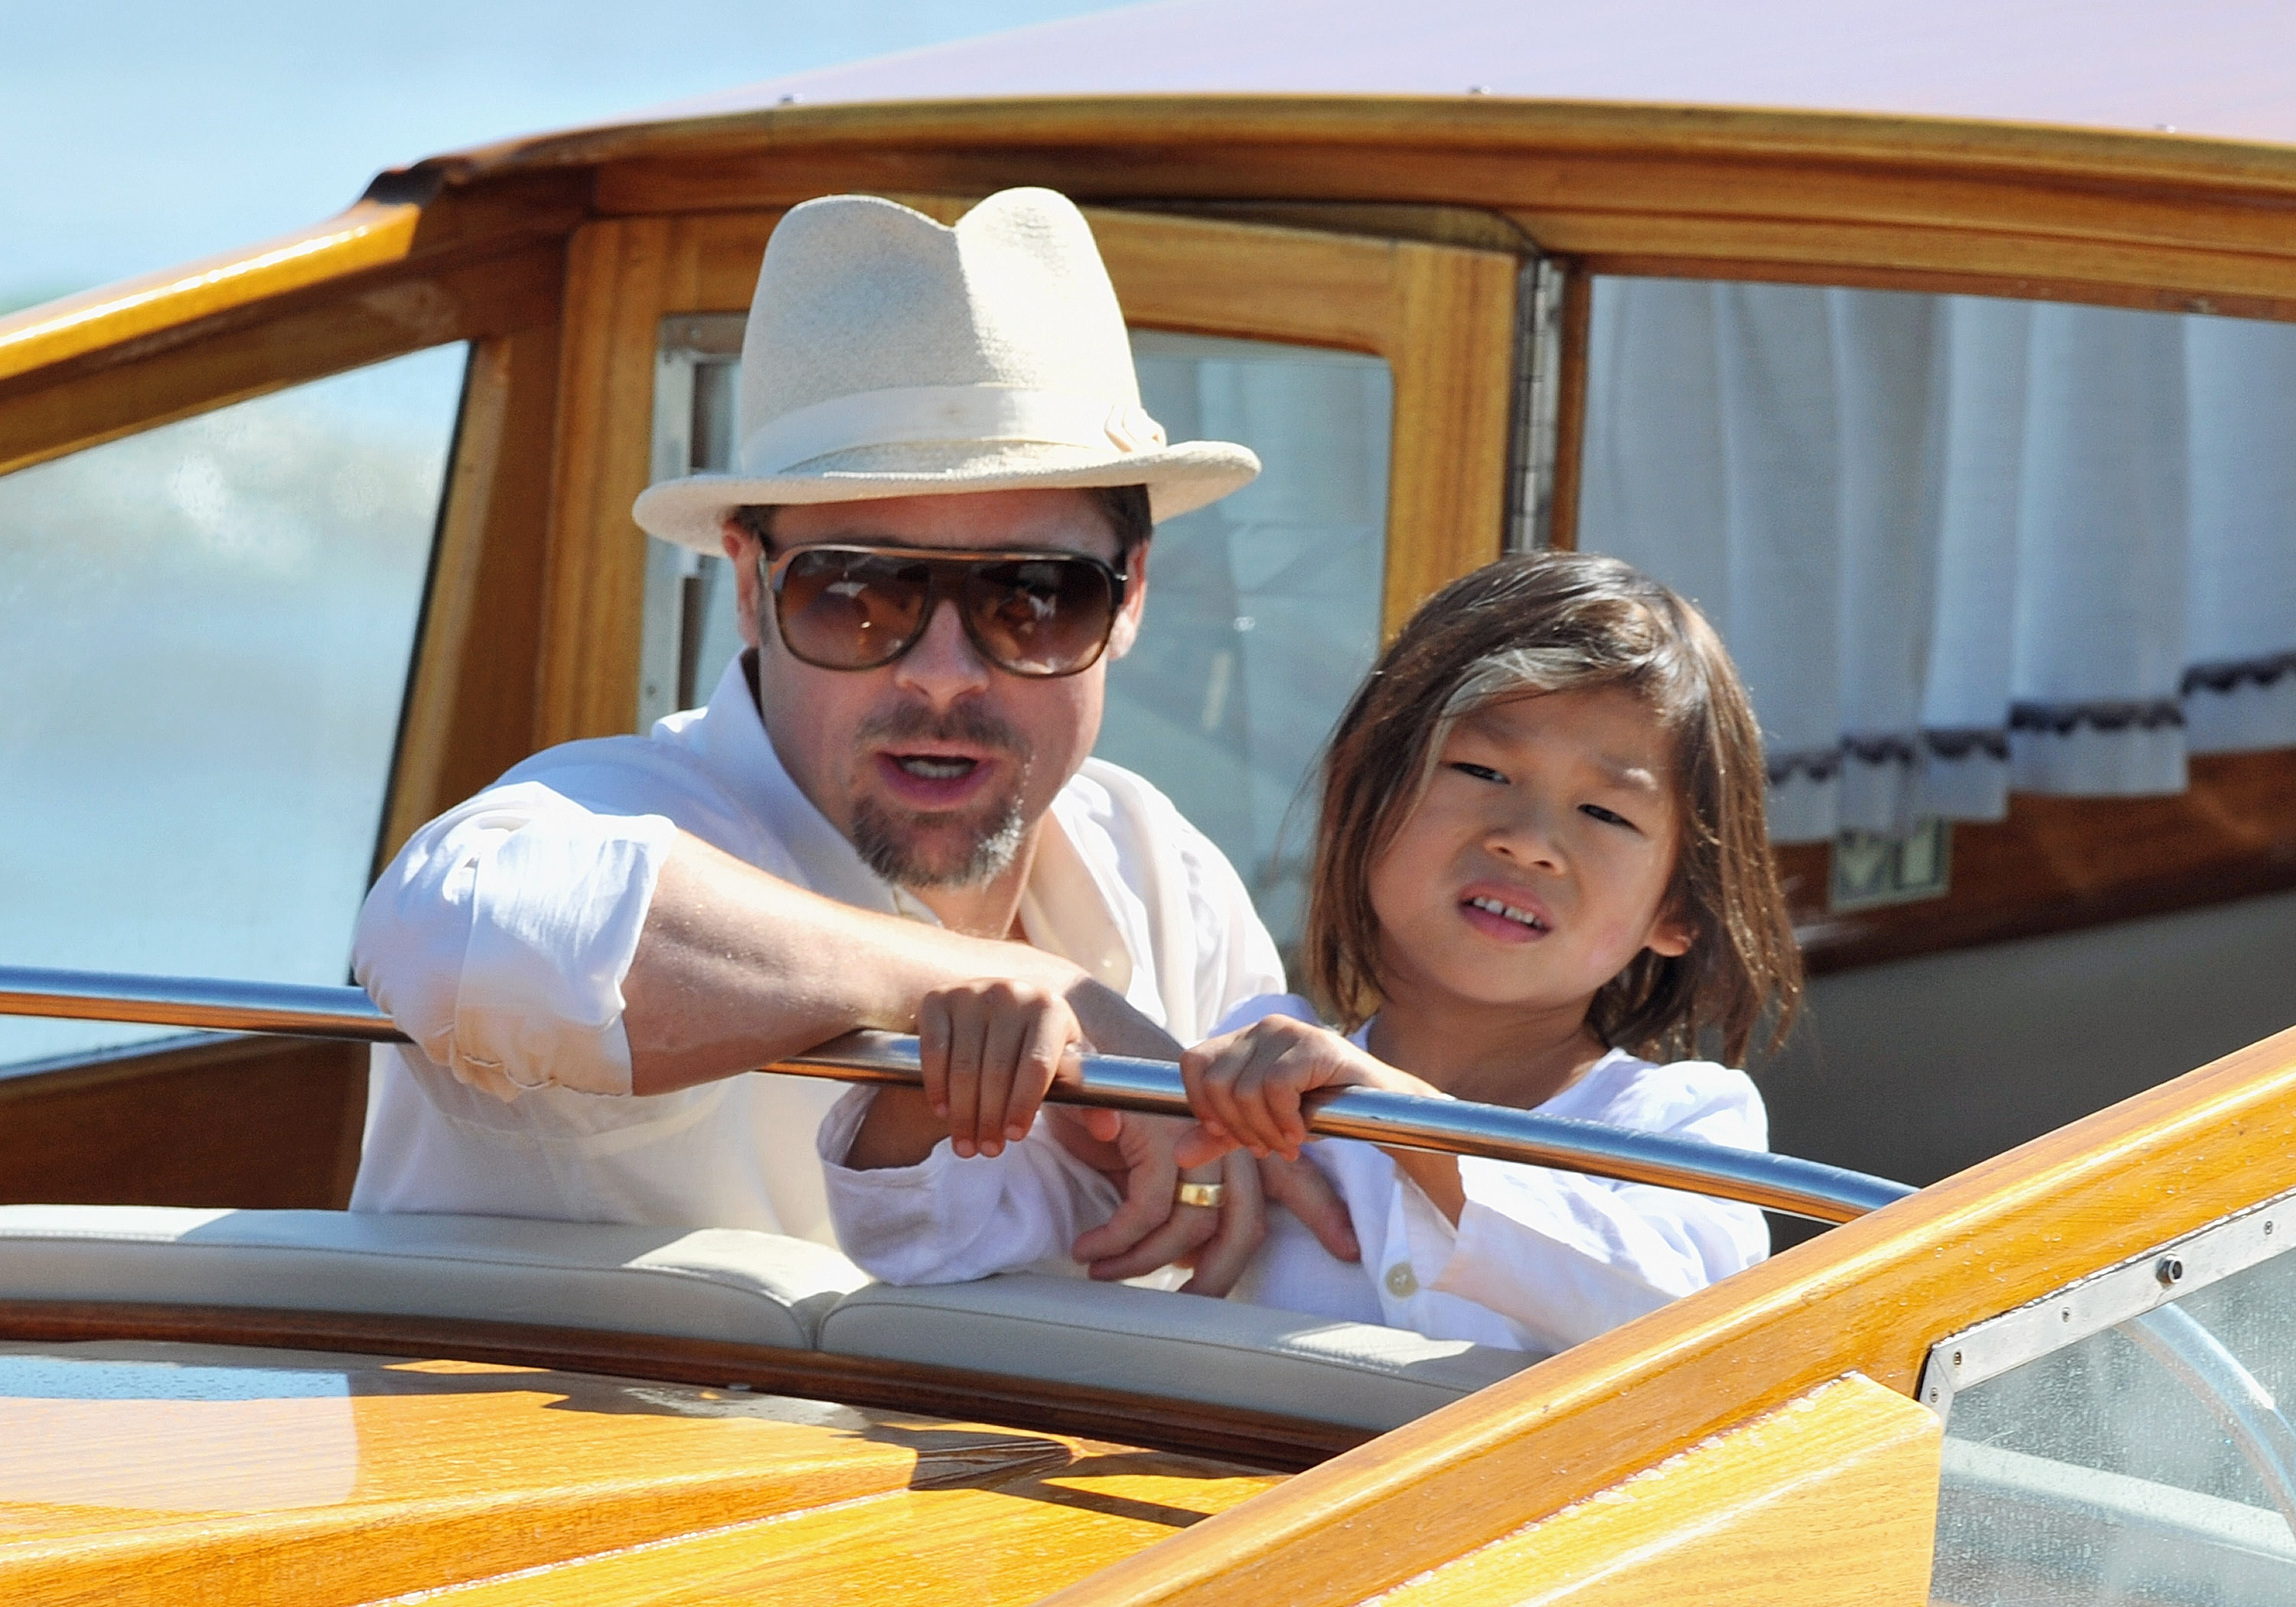 Brad Pitt and son Pax Thien Jolie-Pitt on August 26, 2008 in Venice Italy. | Source: Getty Images